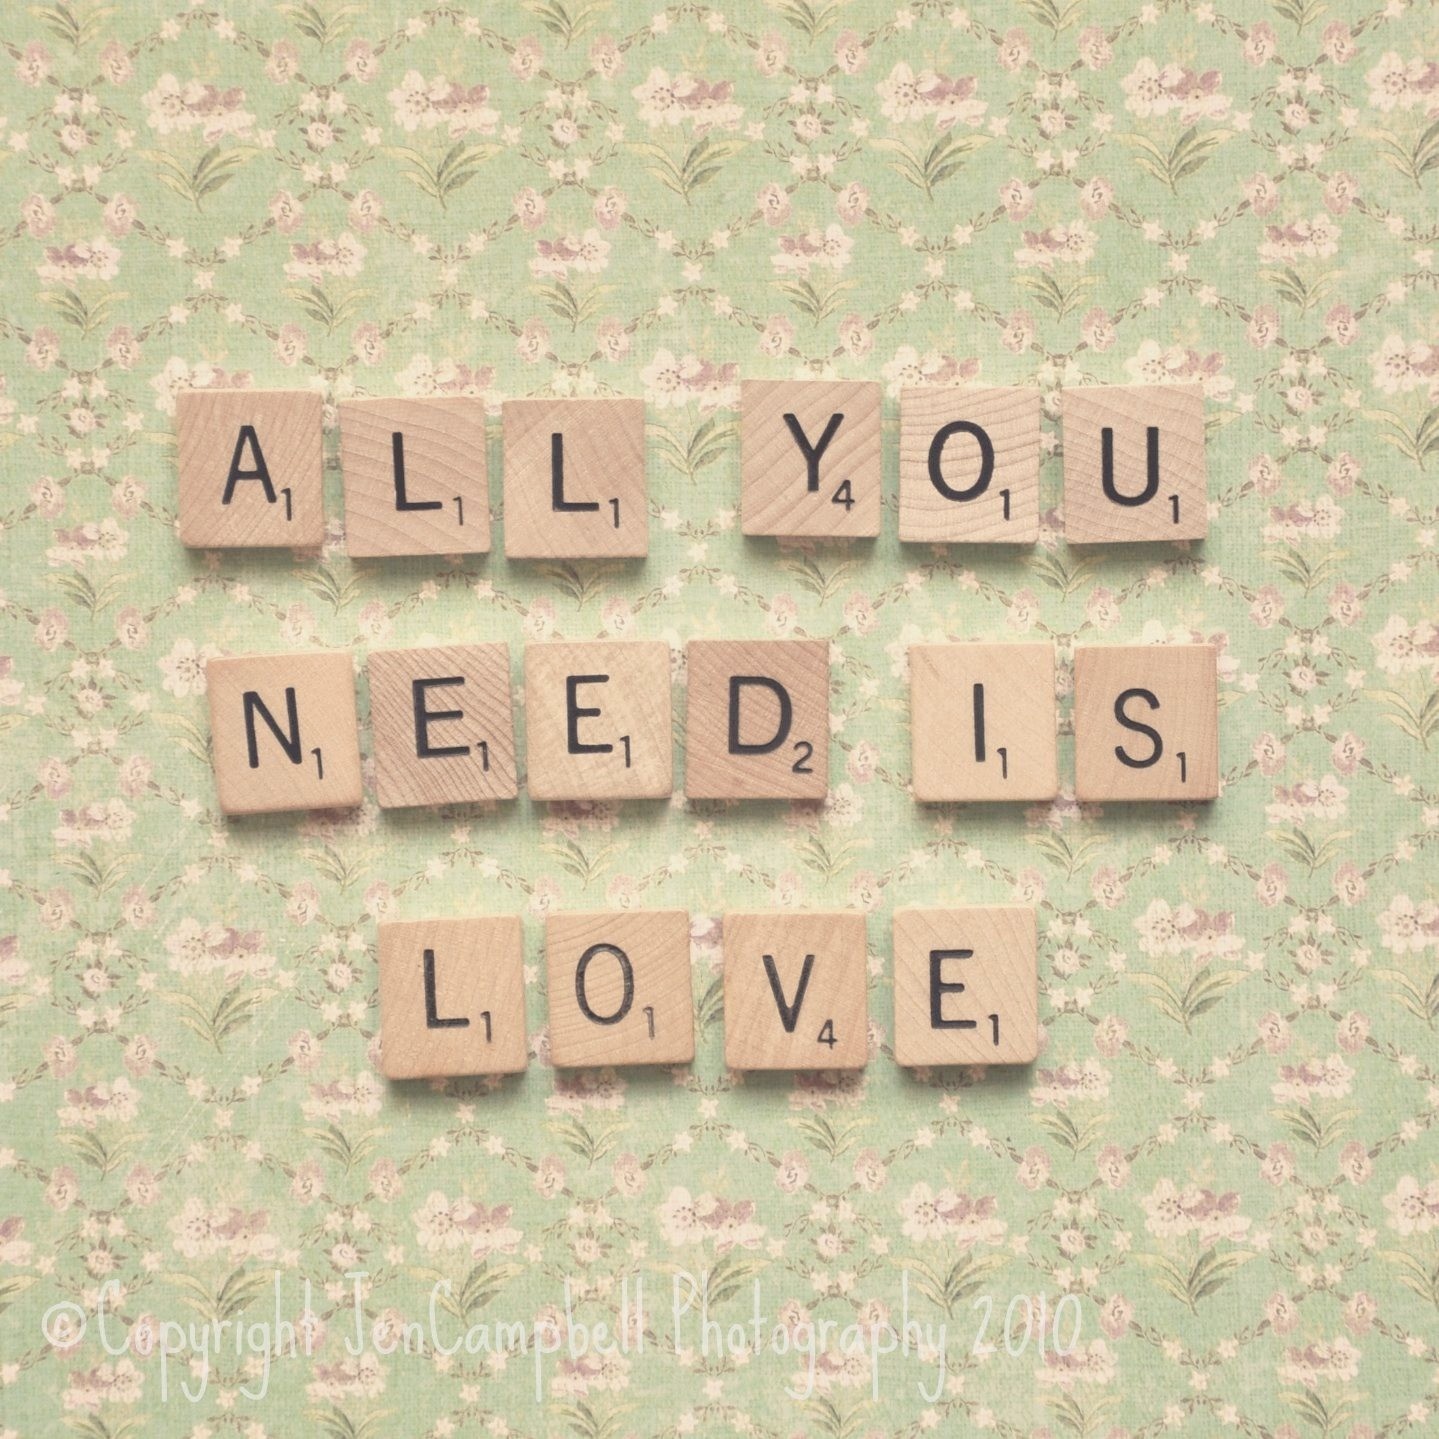 All you need game. All you need is Love. All you need is Love Art. Art is all you need. Love you all.